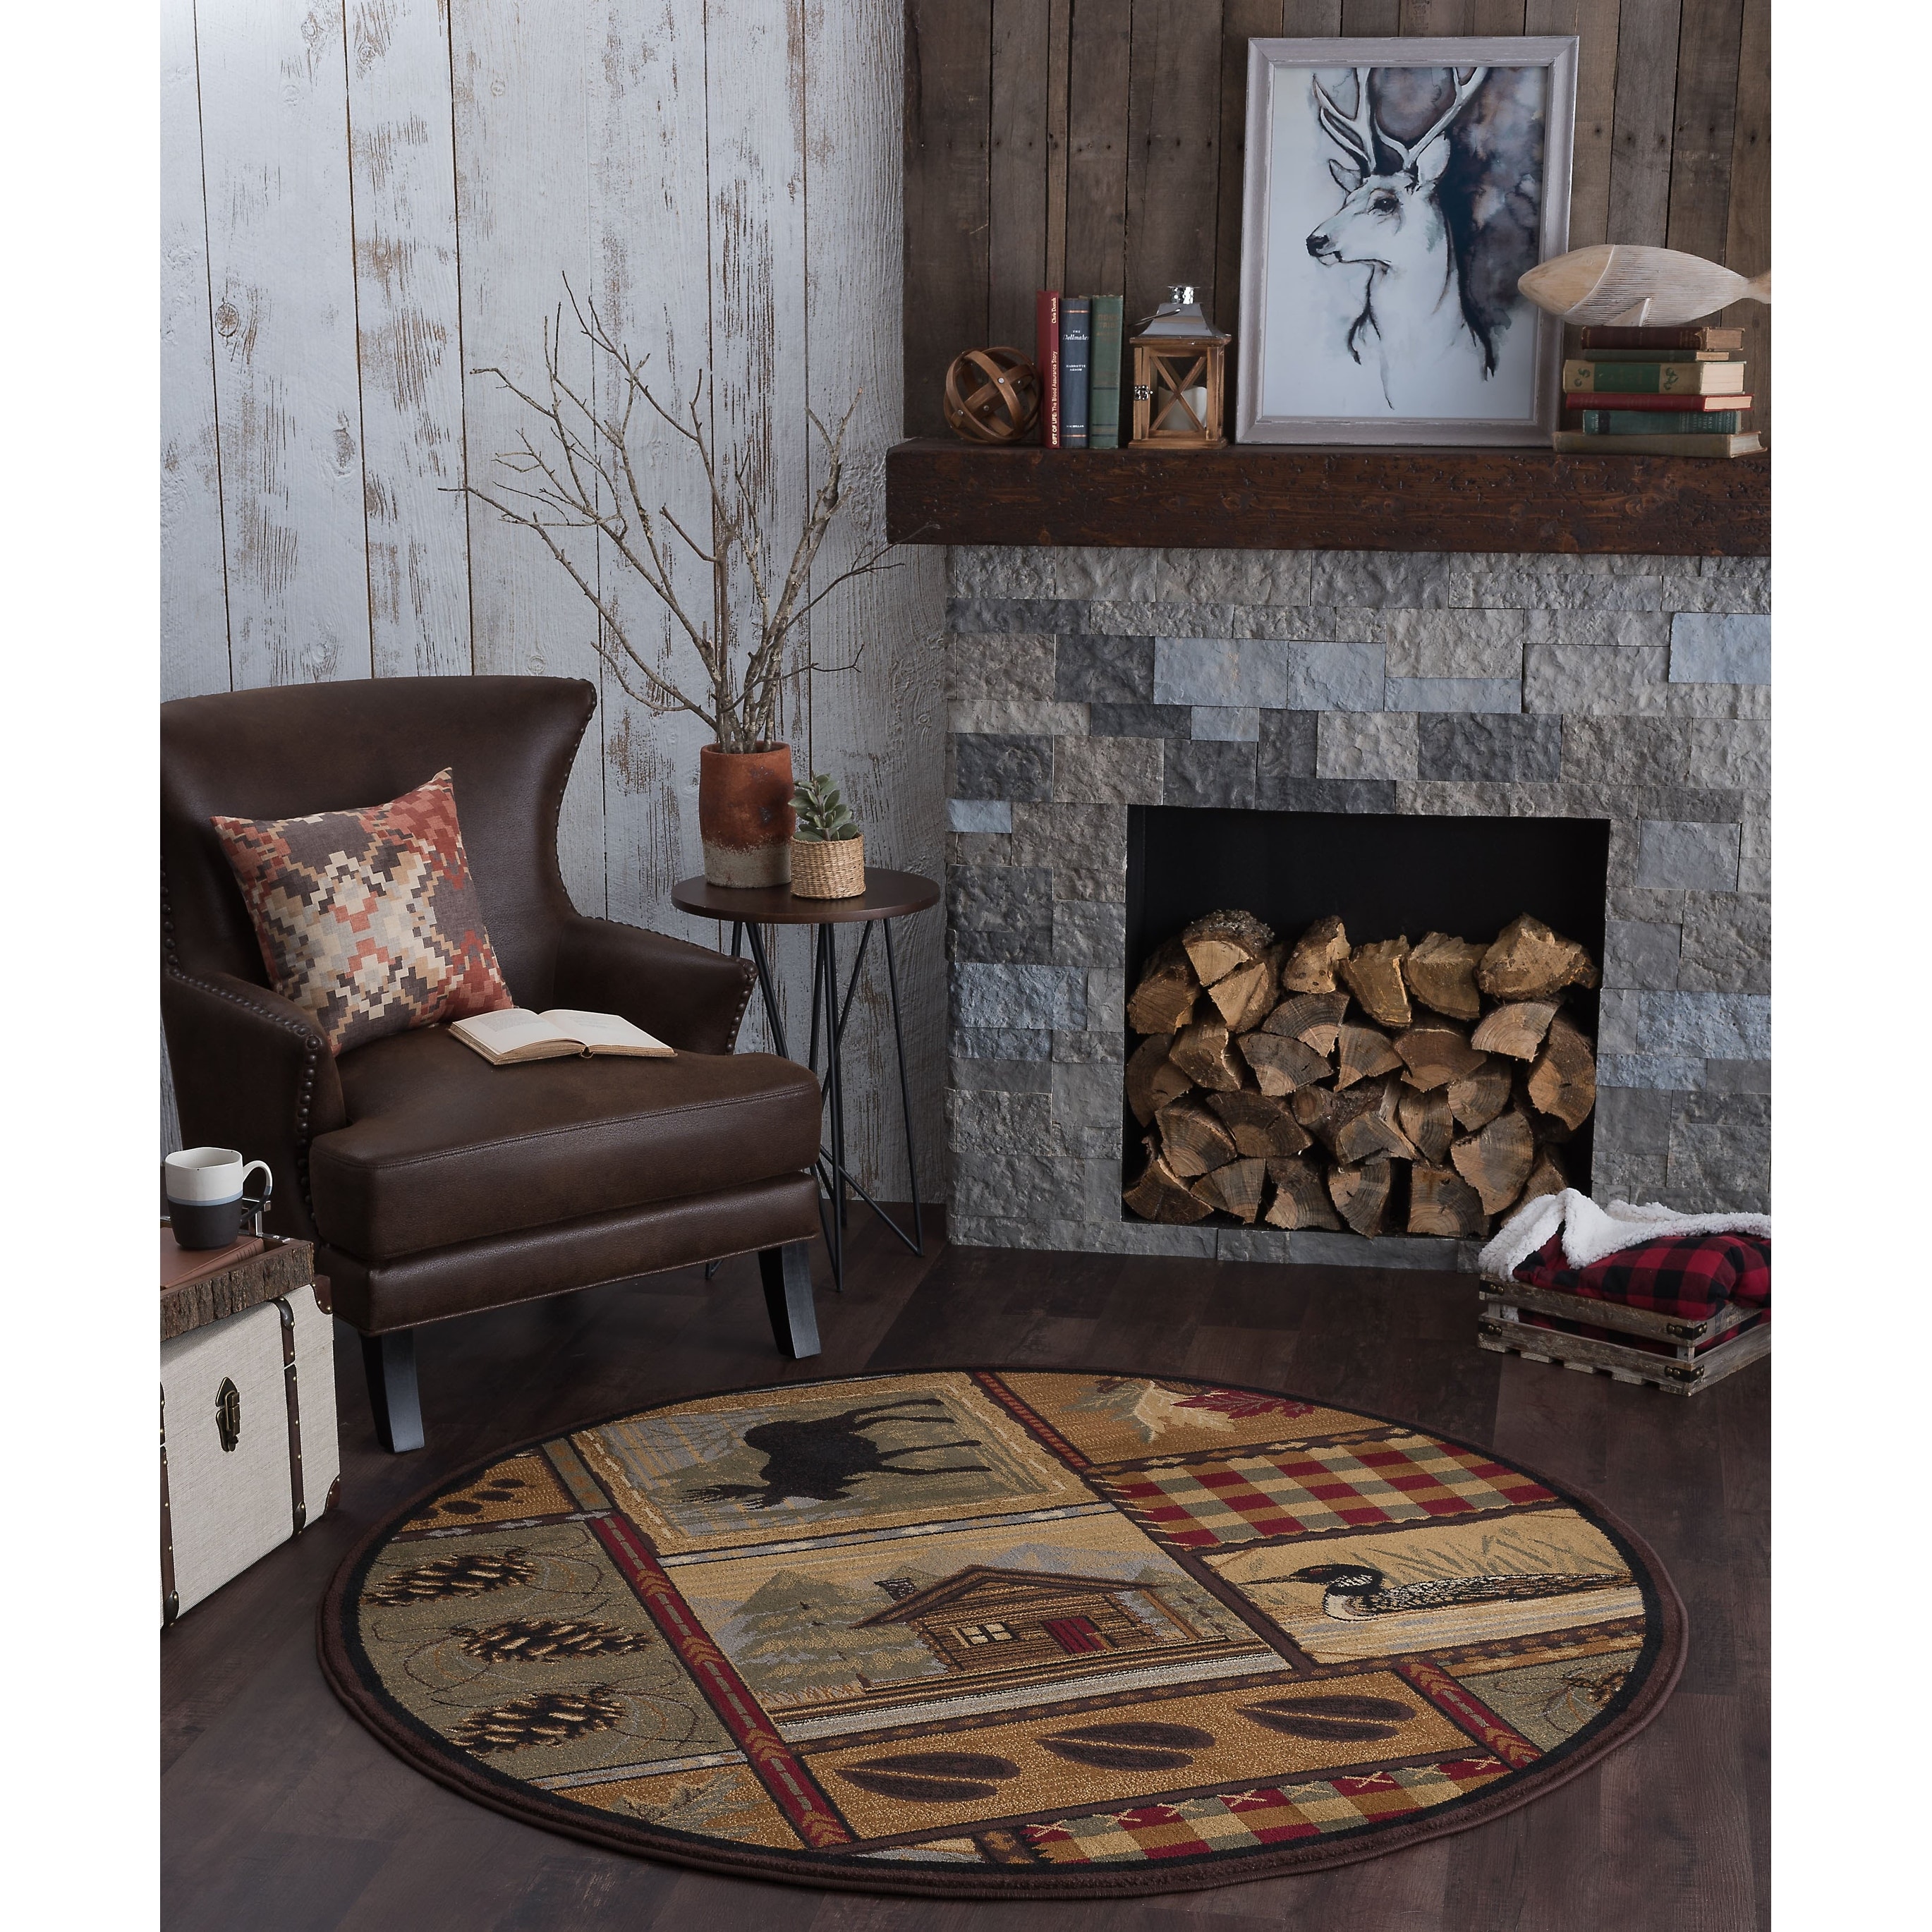 https://ak1.ostkcdn.com/images/products/is/images/direct/783418e8f2bc6b9985b624e77d3fc8efb0a03d74/Alise-Rugs-Natural-Lodge-Novelty-Lodge-Area-Rug.jpg